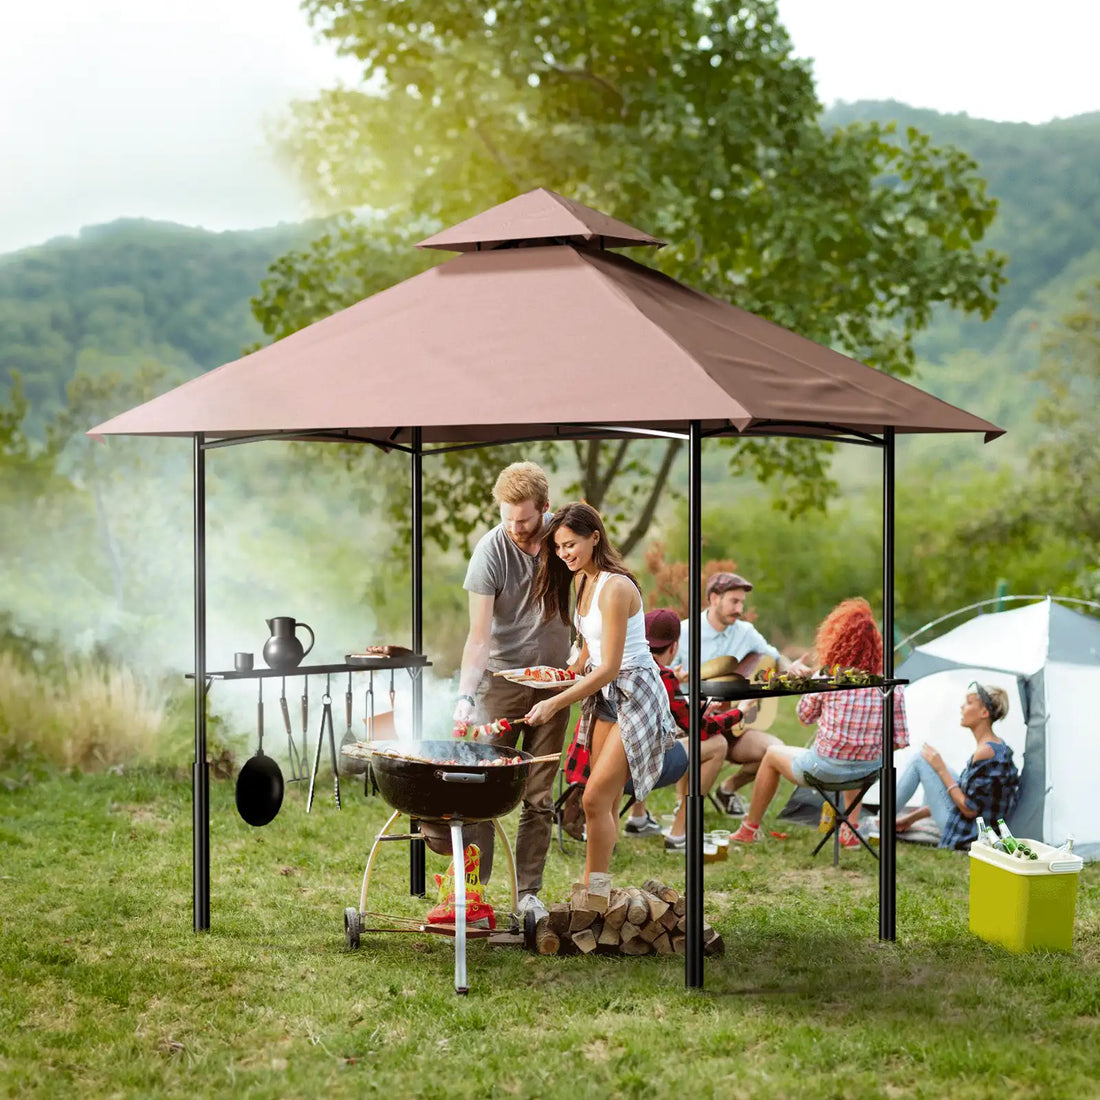 What do you know about grill gazebo?